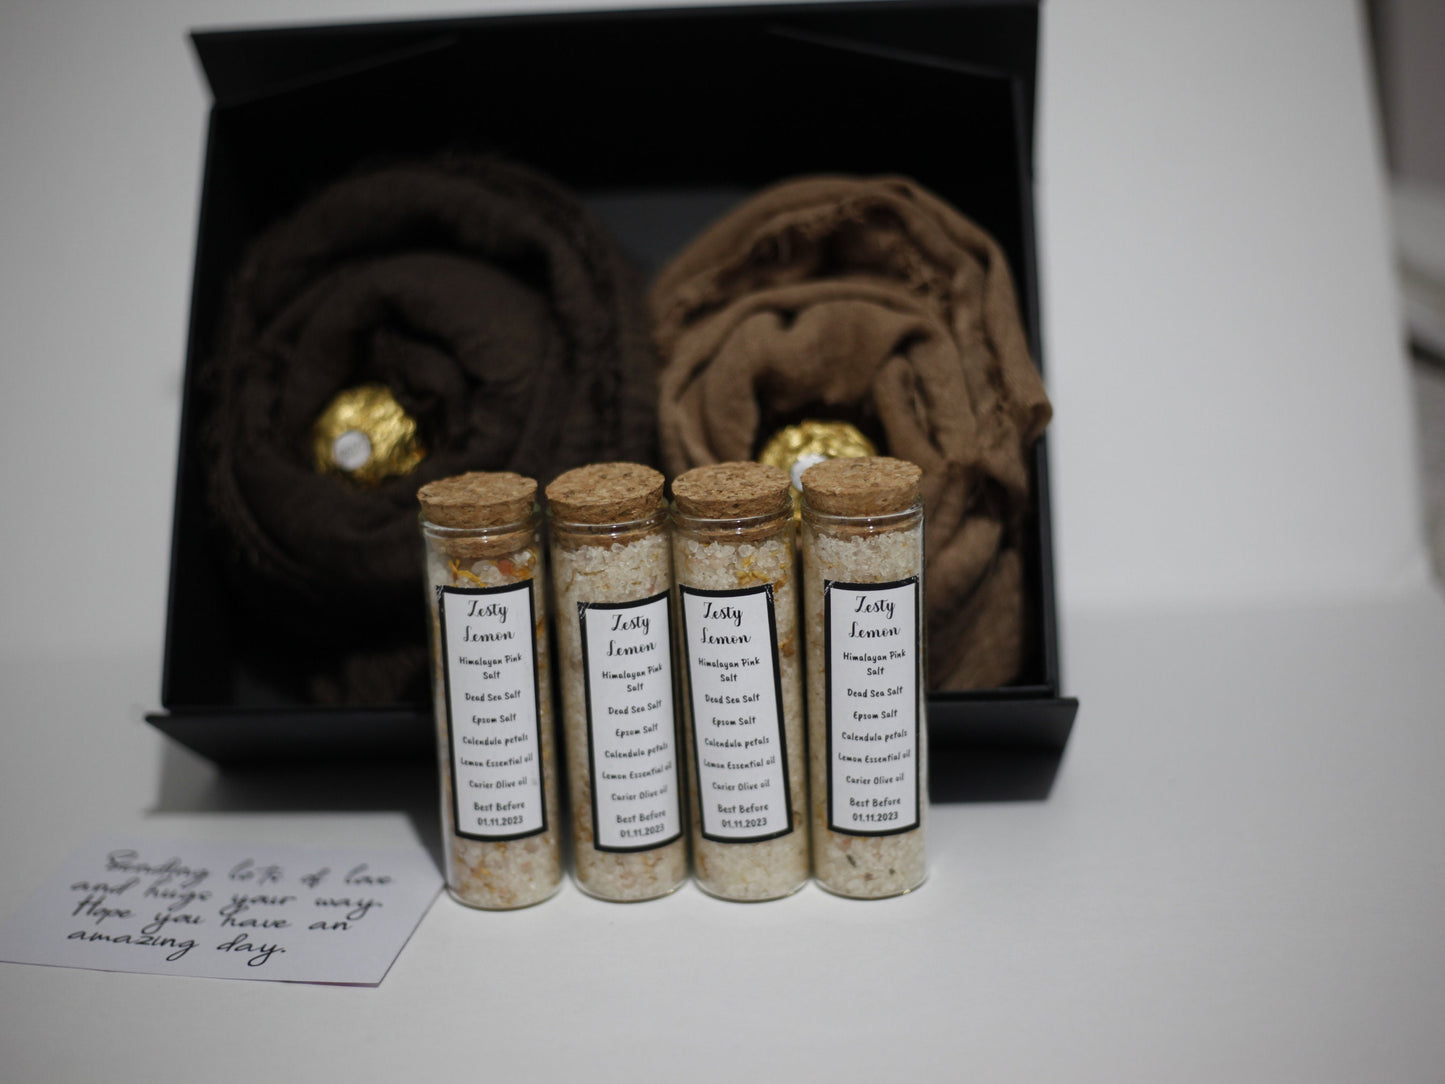 Scarf gift box set with handmade bath salts, chocolates, gift card and gift message, gifts for her, gifts for Christmas, Gifts for Mum,